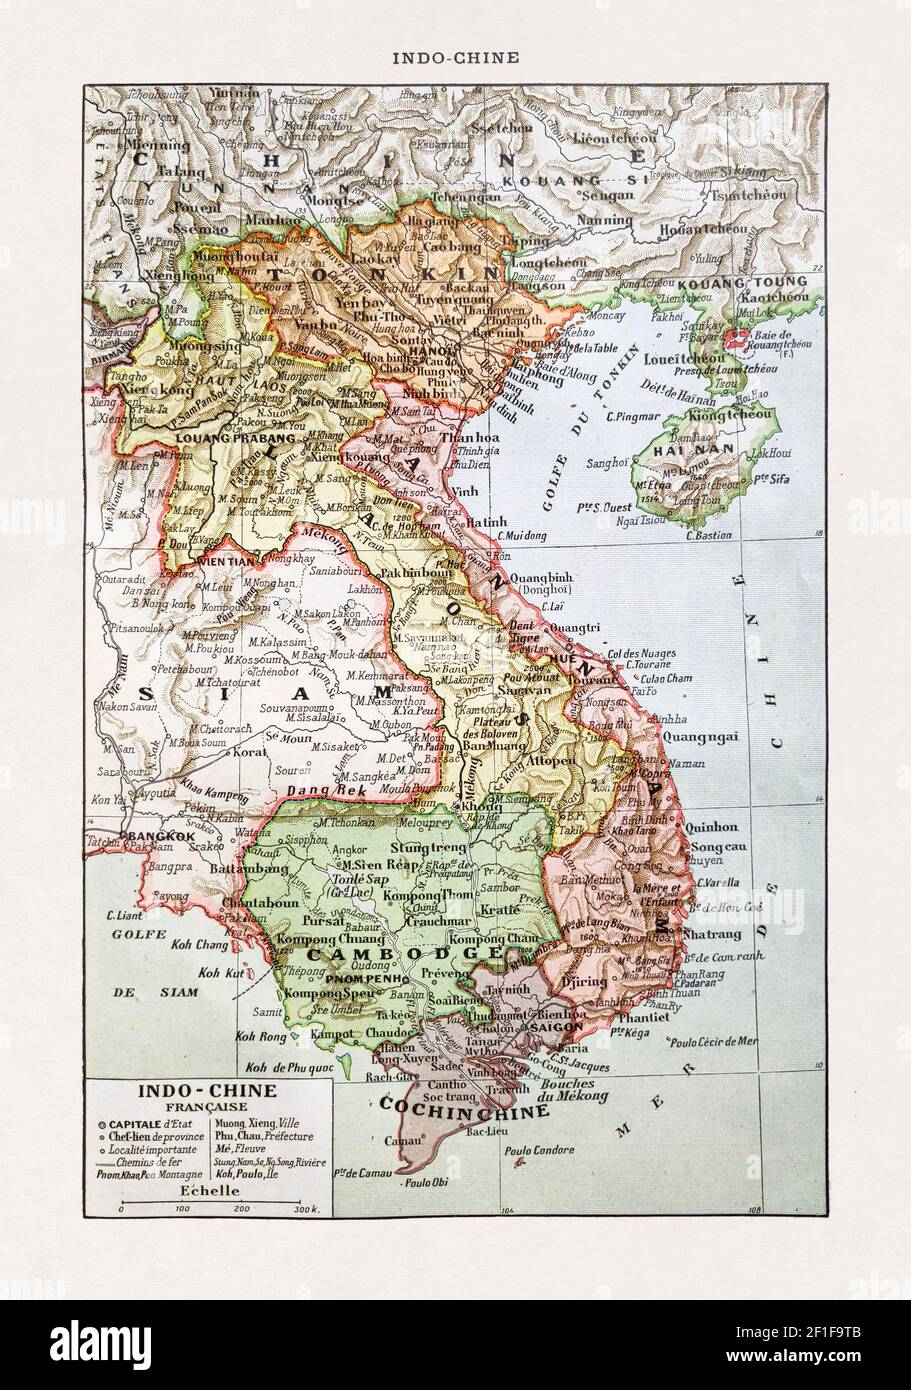 Old map of Indochina printed in the french dictionary 'Dictionnaire complet illustré' by the editor Larousse in 1889. Stock Photo